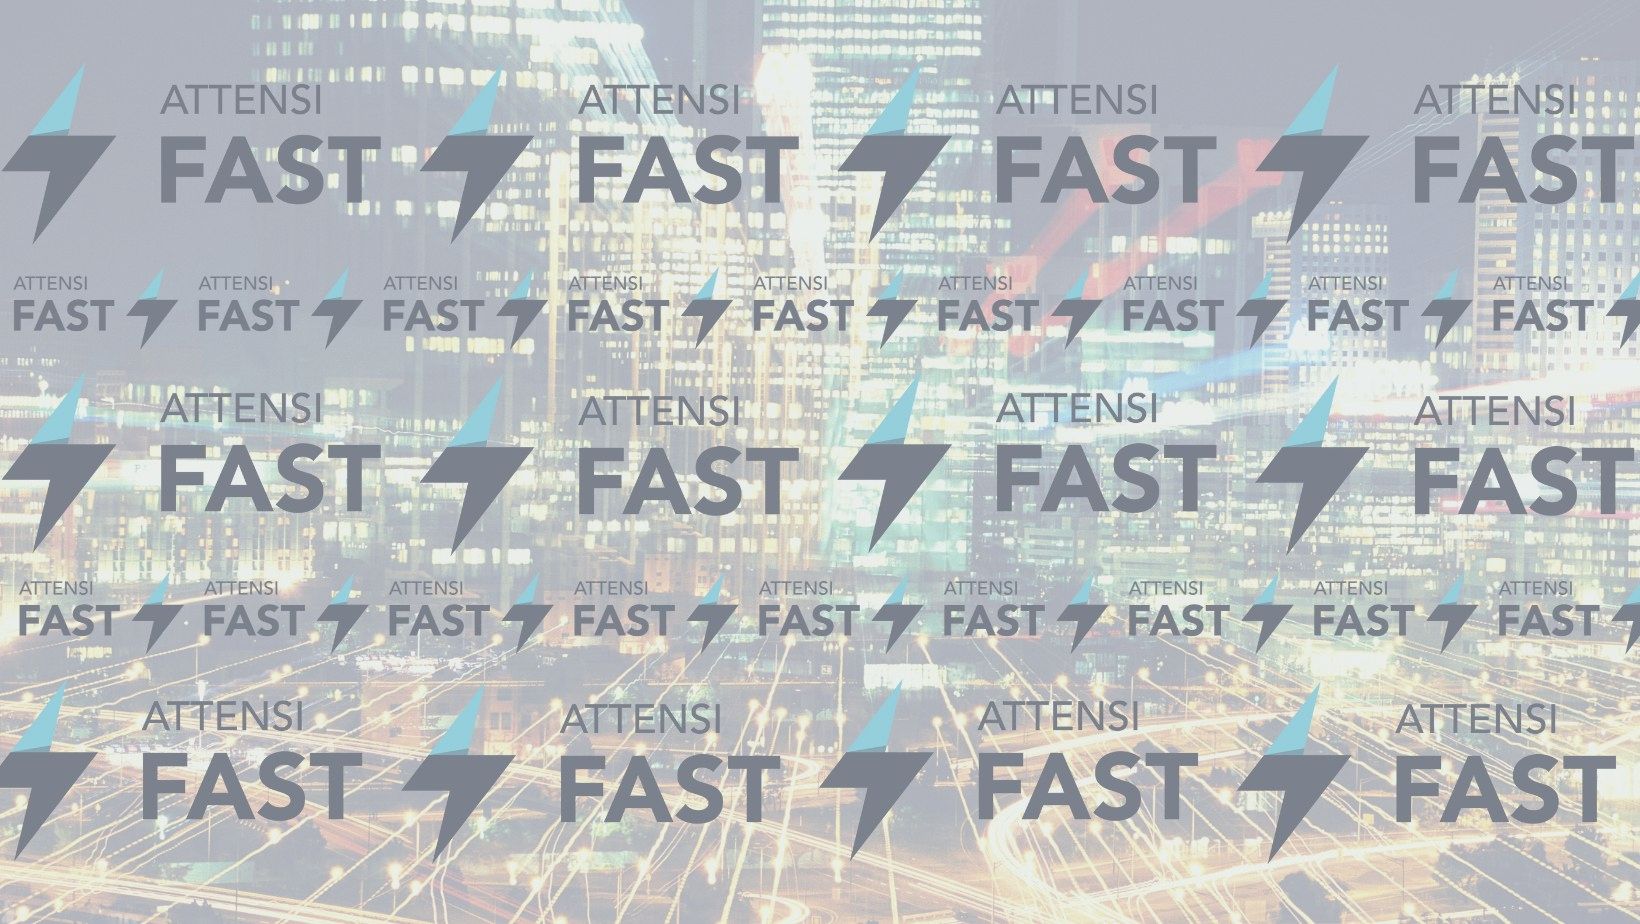 Cityscape background with Attensi FAST logo